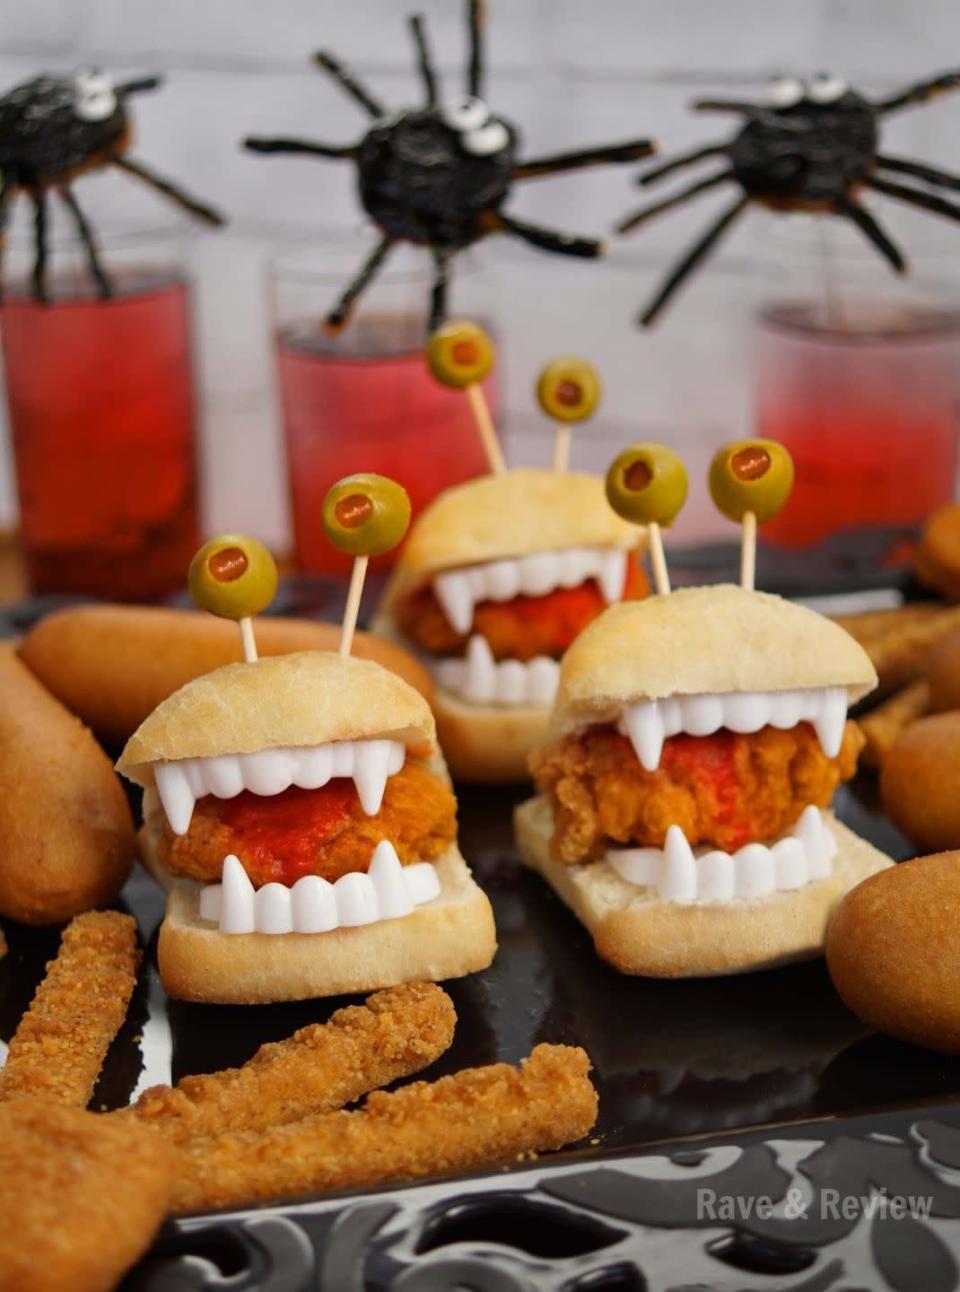 <p>Add in some fake fangs and voila! You’ve got instant creepy (yet savory) critters to jazz up any party platter. They’re almost too cute to eat. (Almost.)</p><p><a href="https://raveandreview.com/2018/10/spooky-swizzle-sticks-and-chicken-sliders-for-halloween.html" rel="nofollow noopener" target="_blank" data-ylk="slk:Recipe from Rave & Review" class="link "><em>Recipe from Rave & Review</em></a></p>